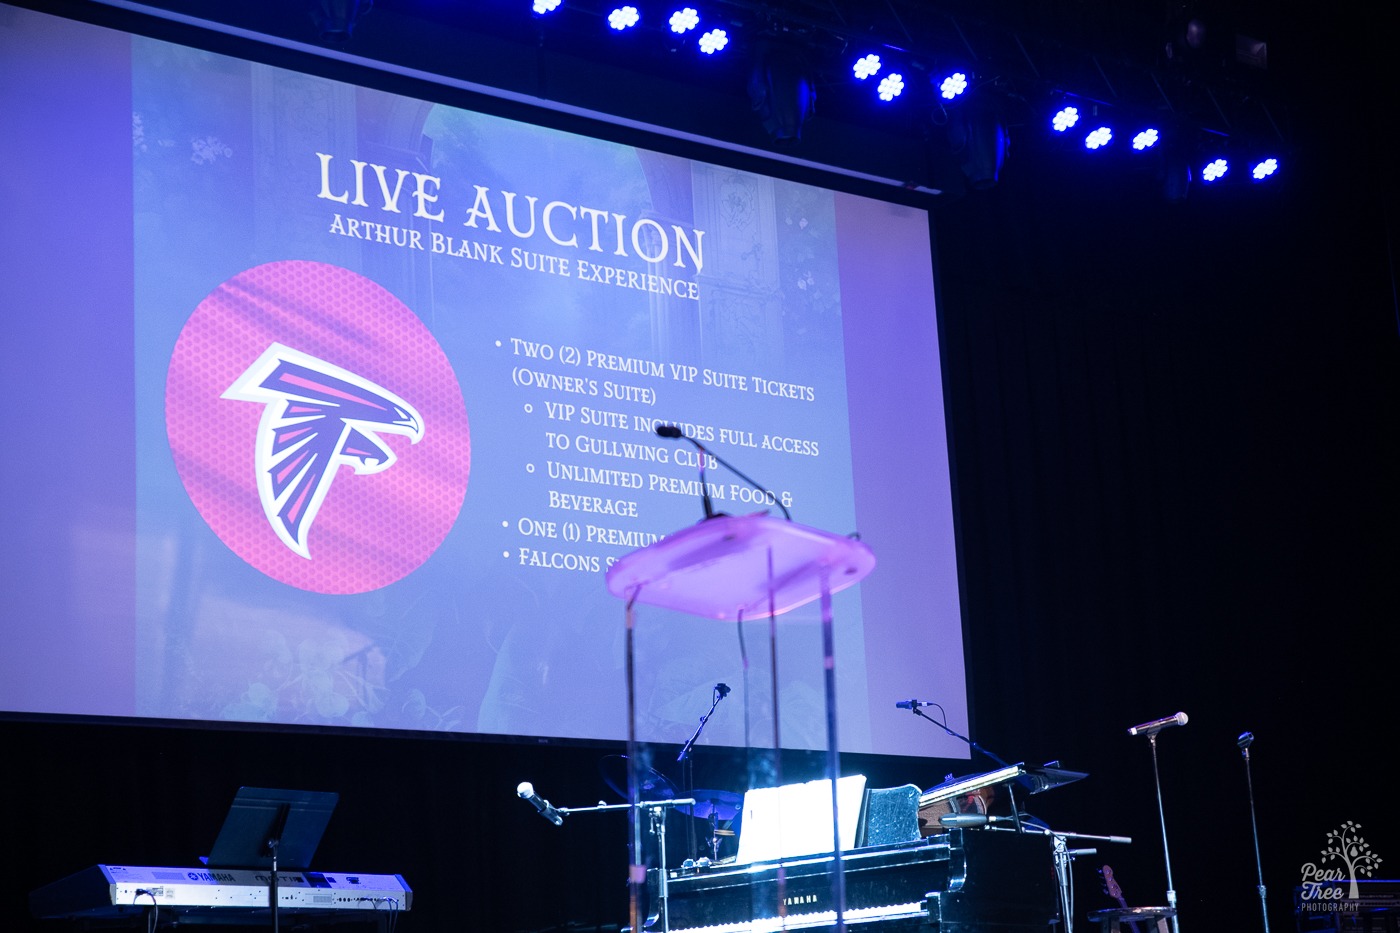 Live auction slide projecteeed of an Arthur Blank Suite Experience up for bid for an Atlanta Falcons game.